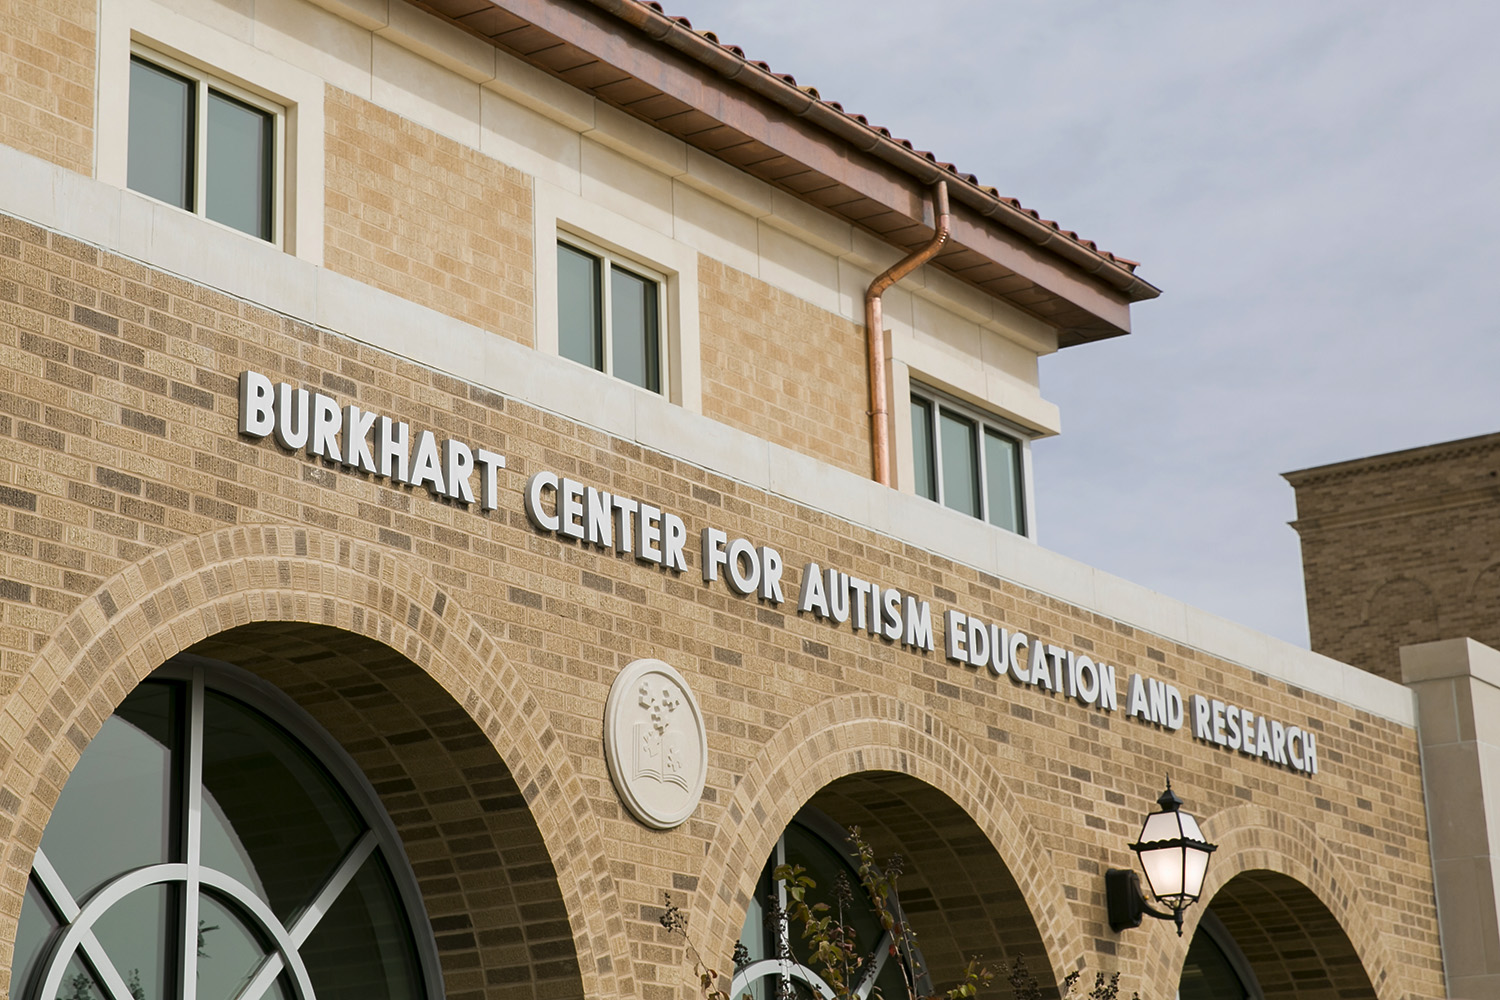 The Burkhart Center for Autism Education & Research